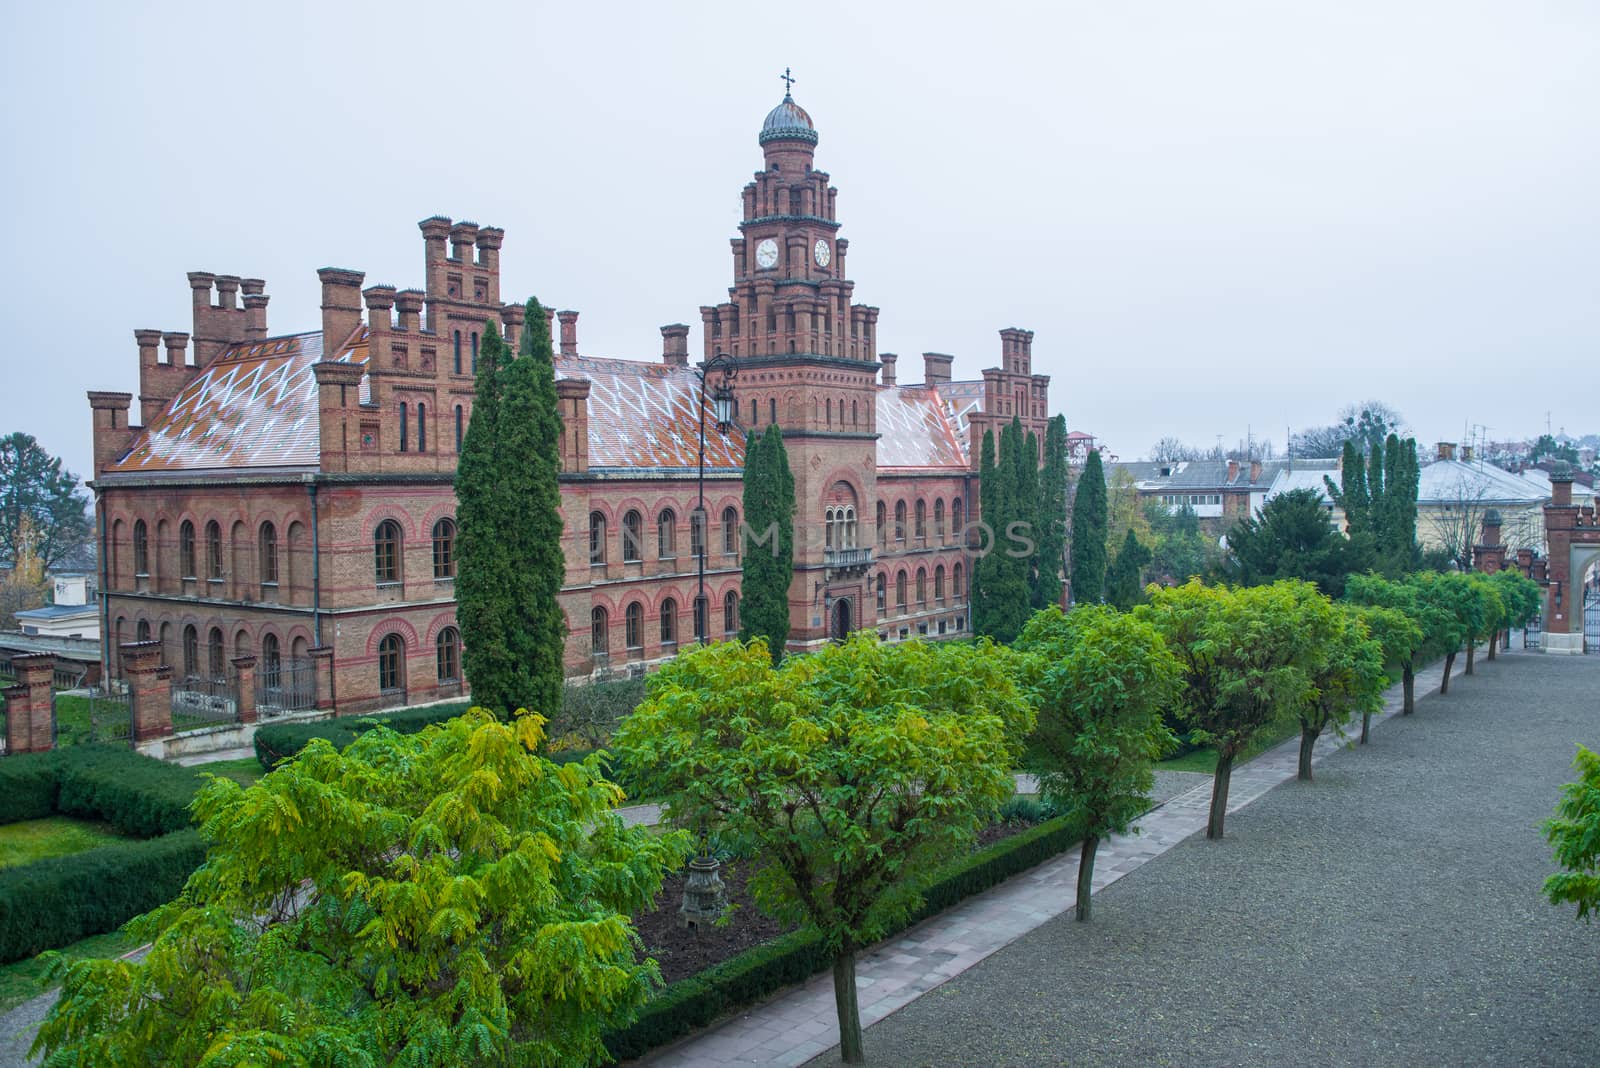 The building of Chernivtsi National University with garden in front, unesco heritage site